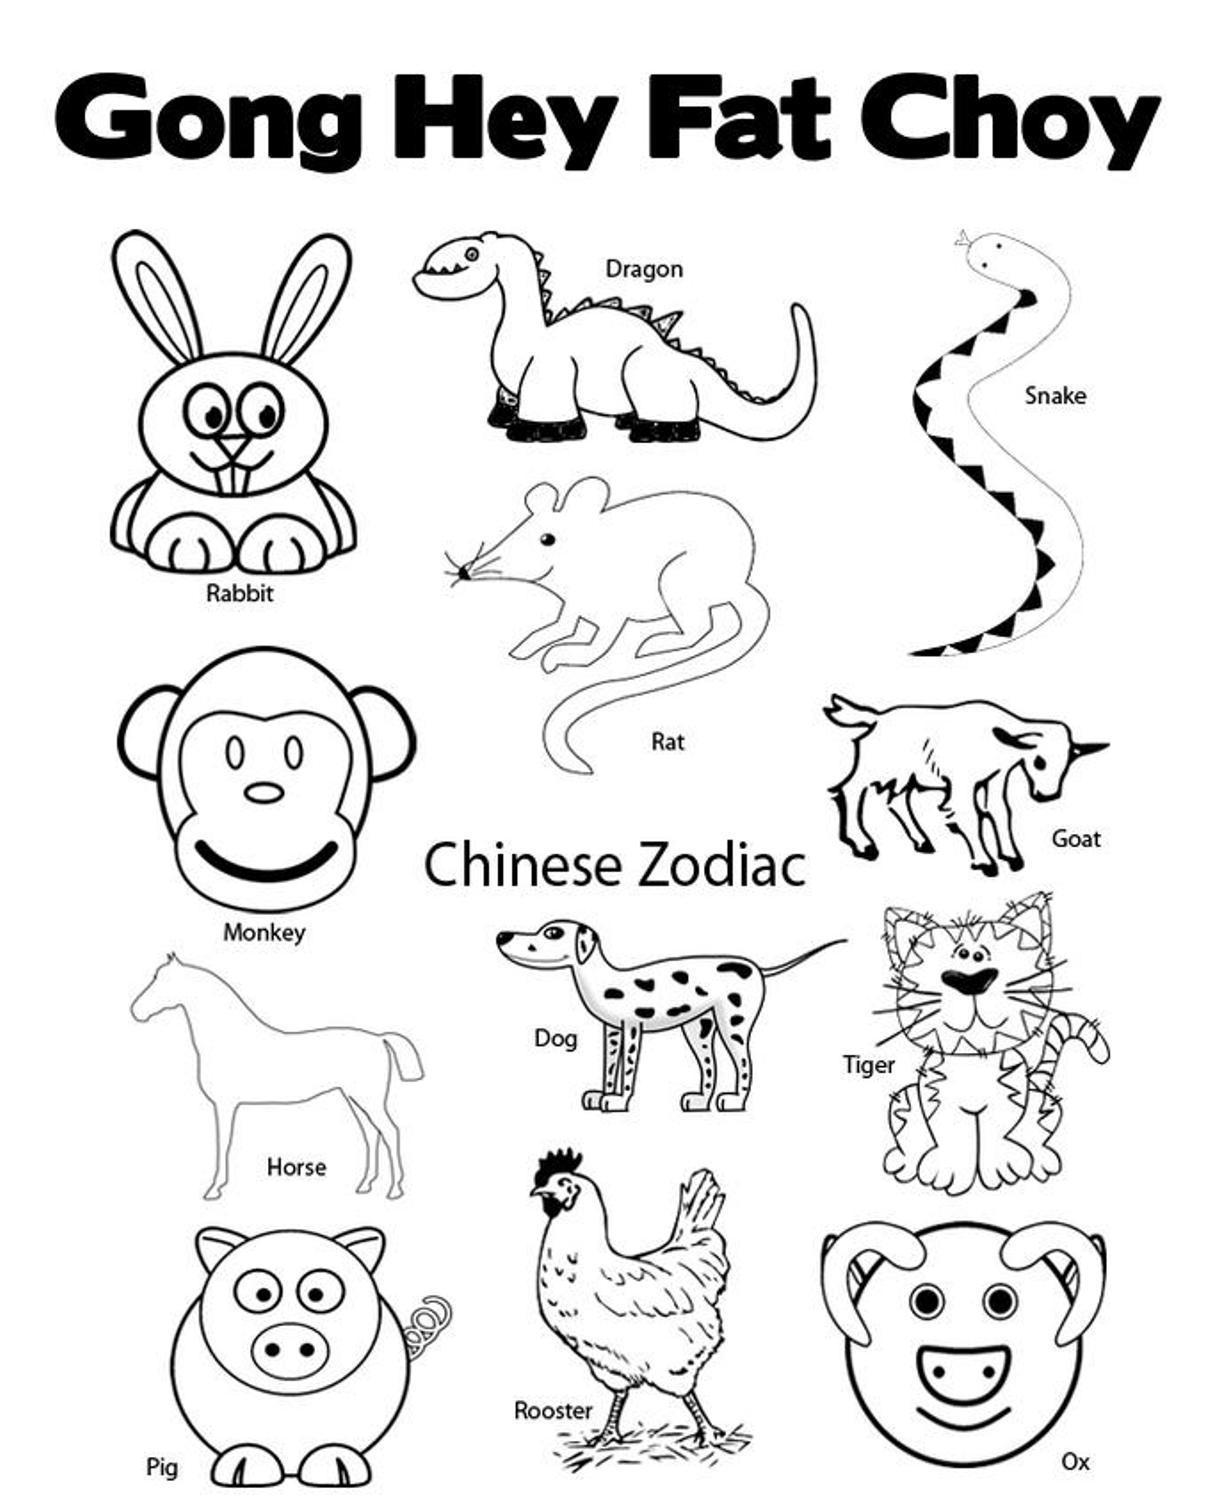 Chinese Zodiac Sign Coloring Pages Free Printable Picture Of Zodiac Signs For Chinese New Year